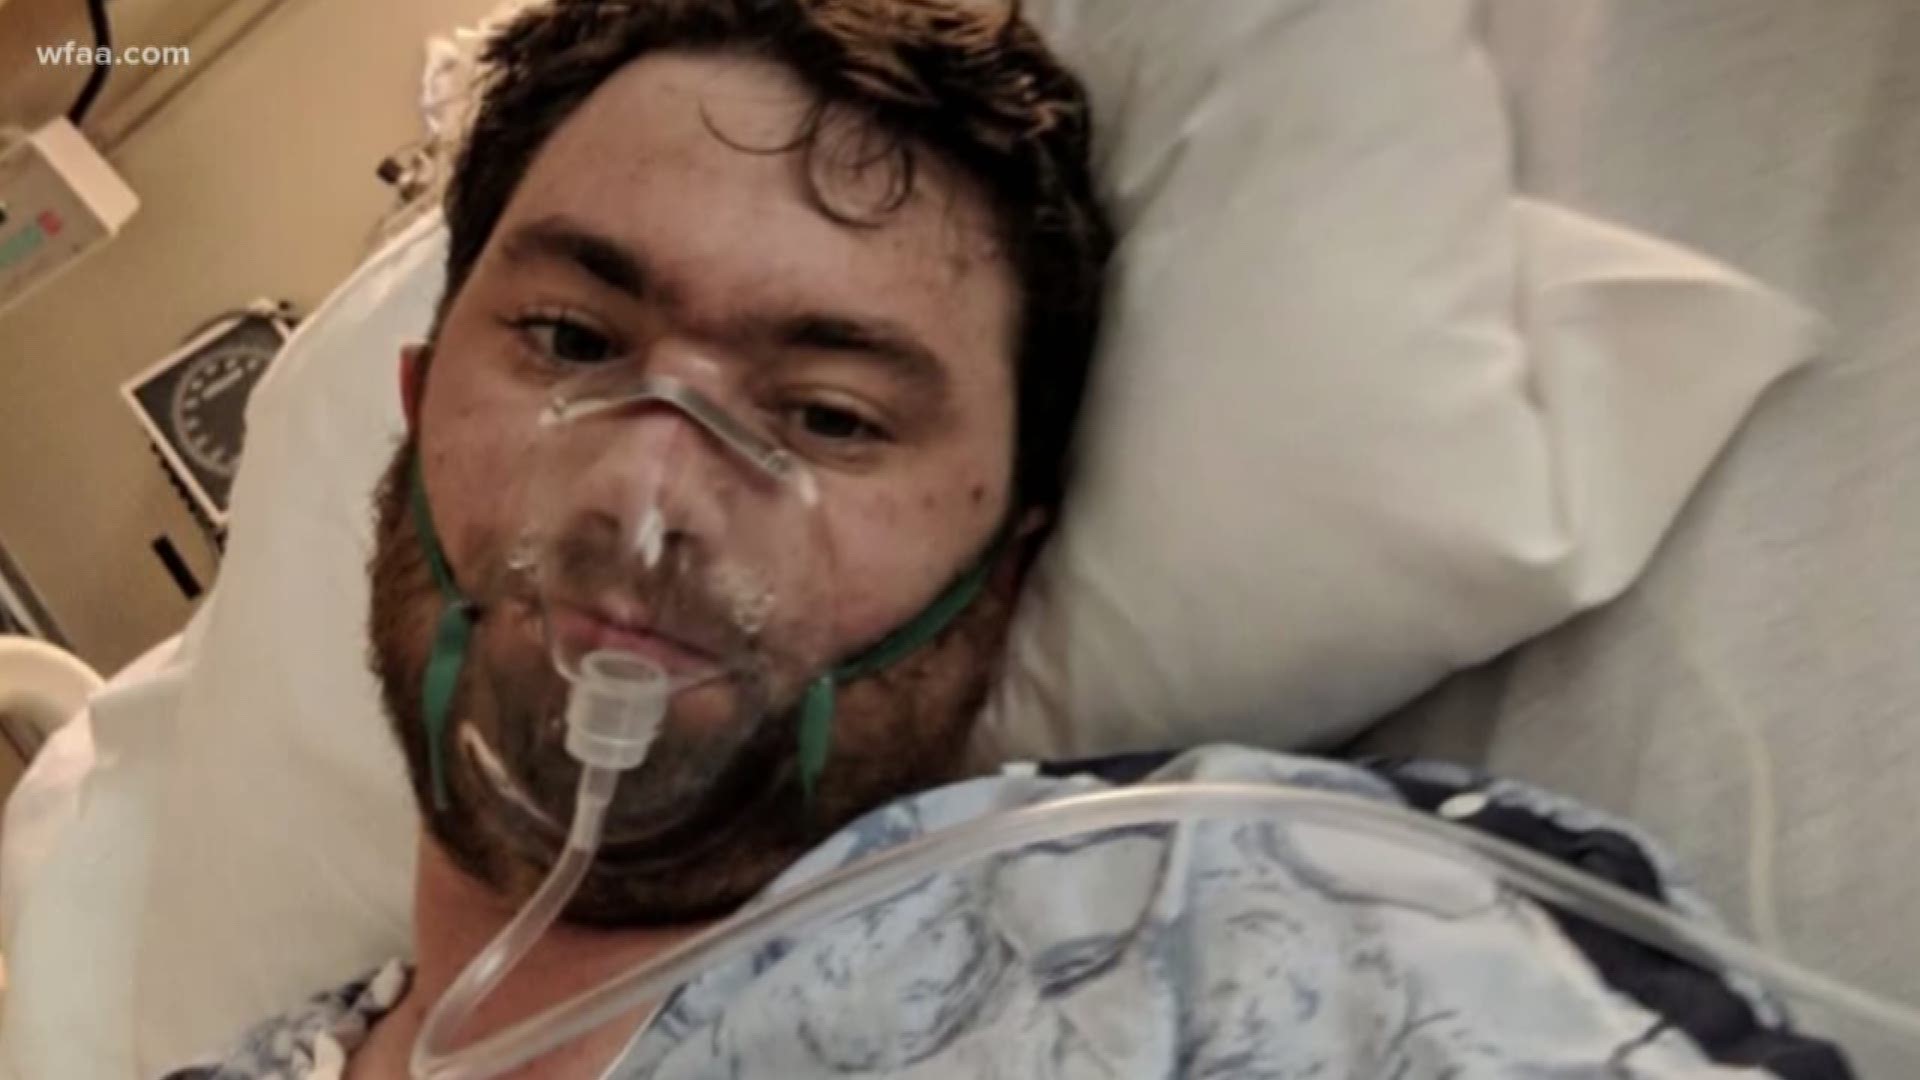 Only four months after he started vaping Christopher Machelski told a cautionary tale from the Medical City Las Colinas Hospital. “This isn't worth it. Don’t do it."